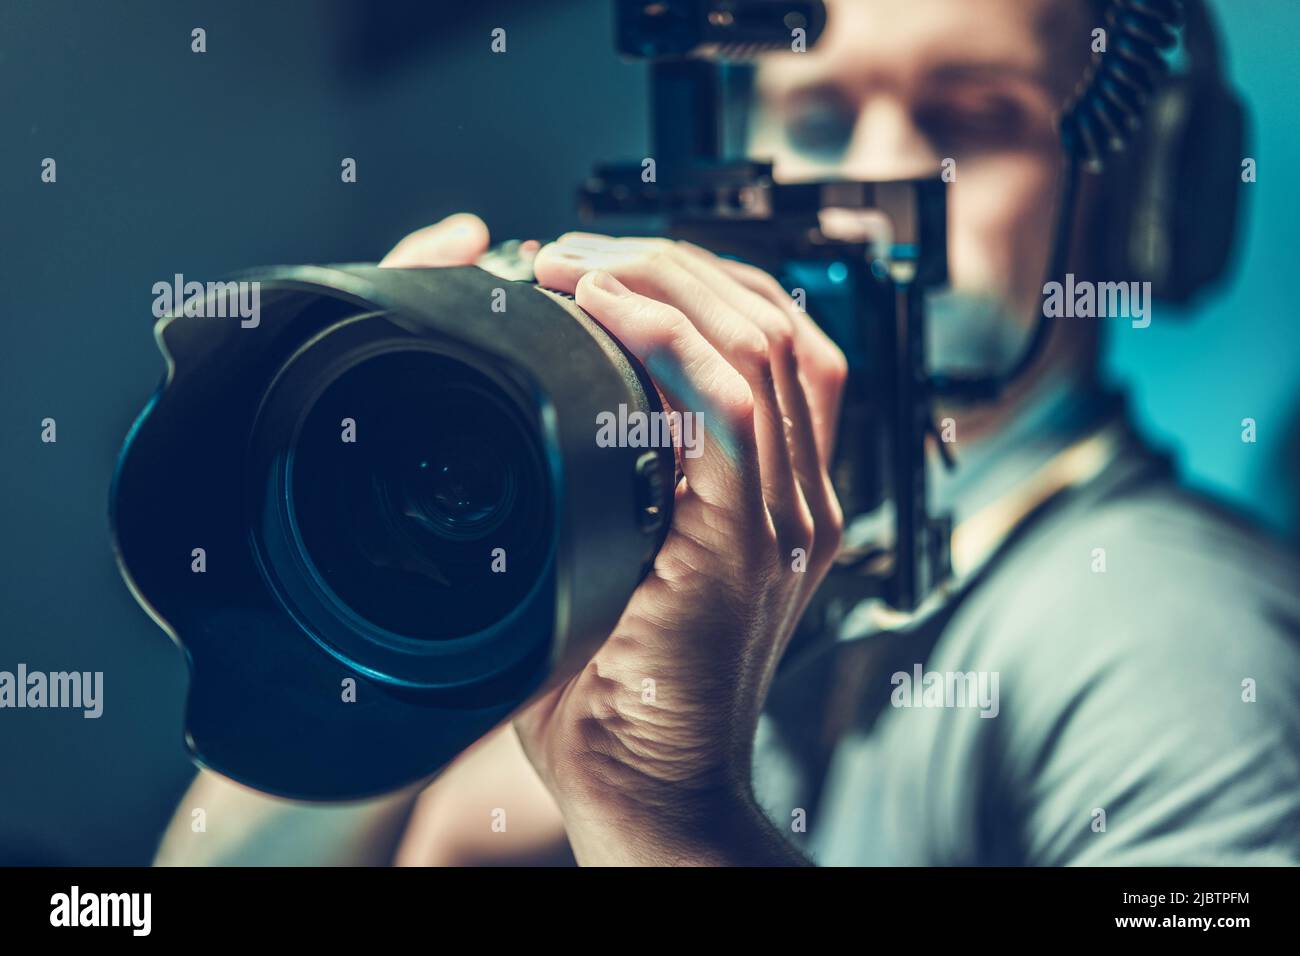 Male Videographer Focused and Concentrated on Recording the Footage with His Mirrorless Camera. Digital Videography Industry Theme. Stock Photo